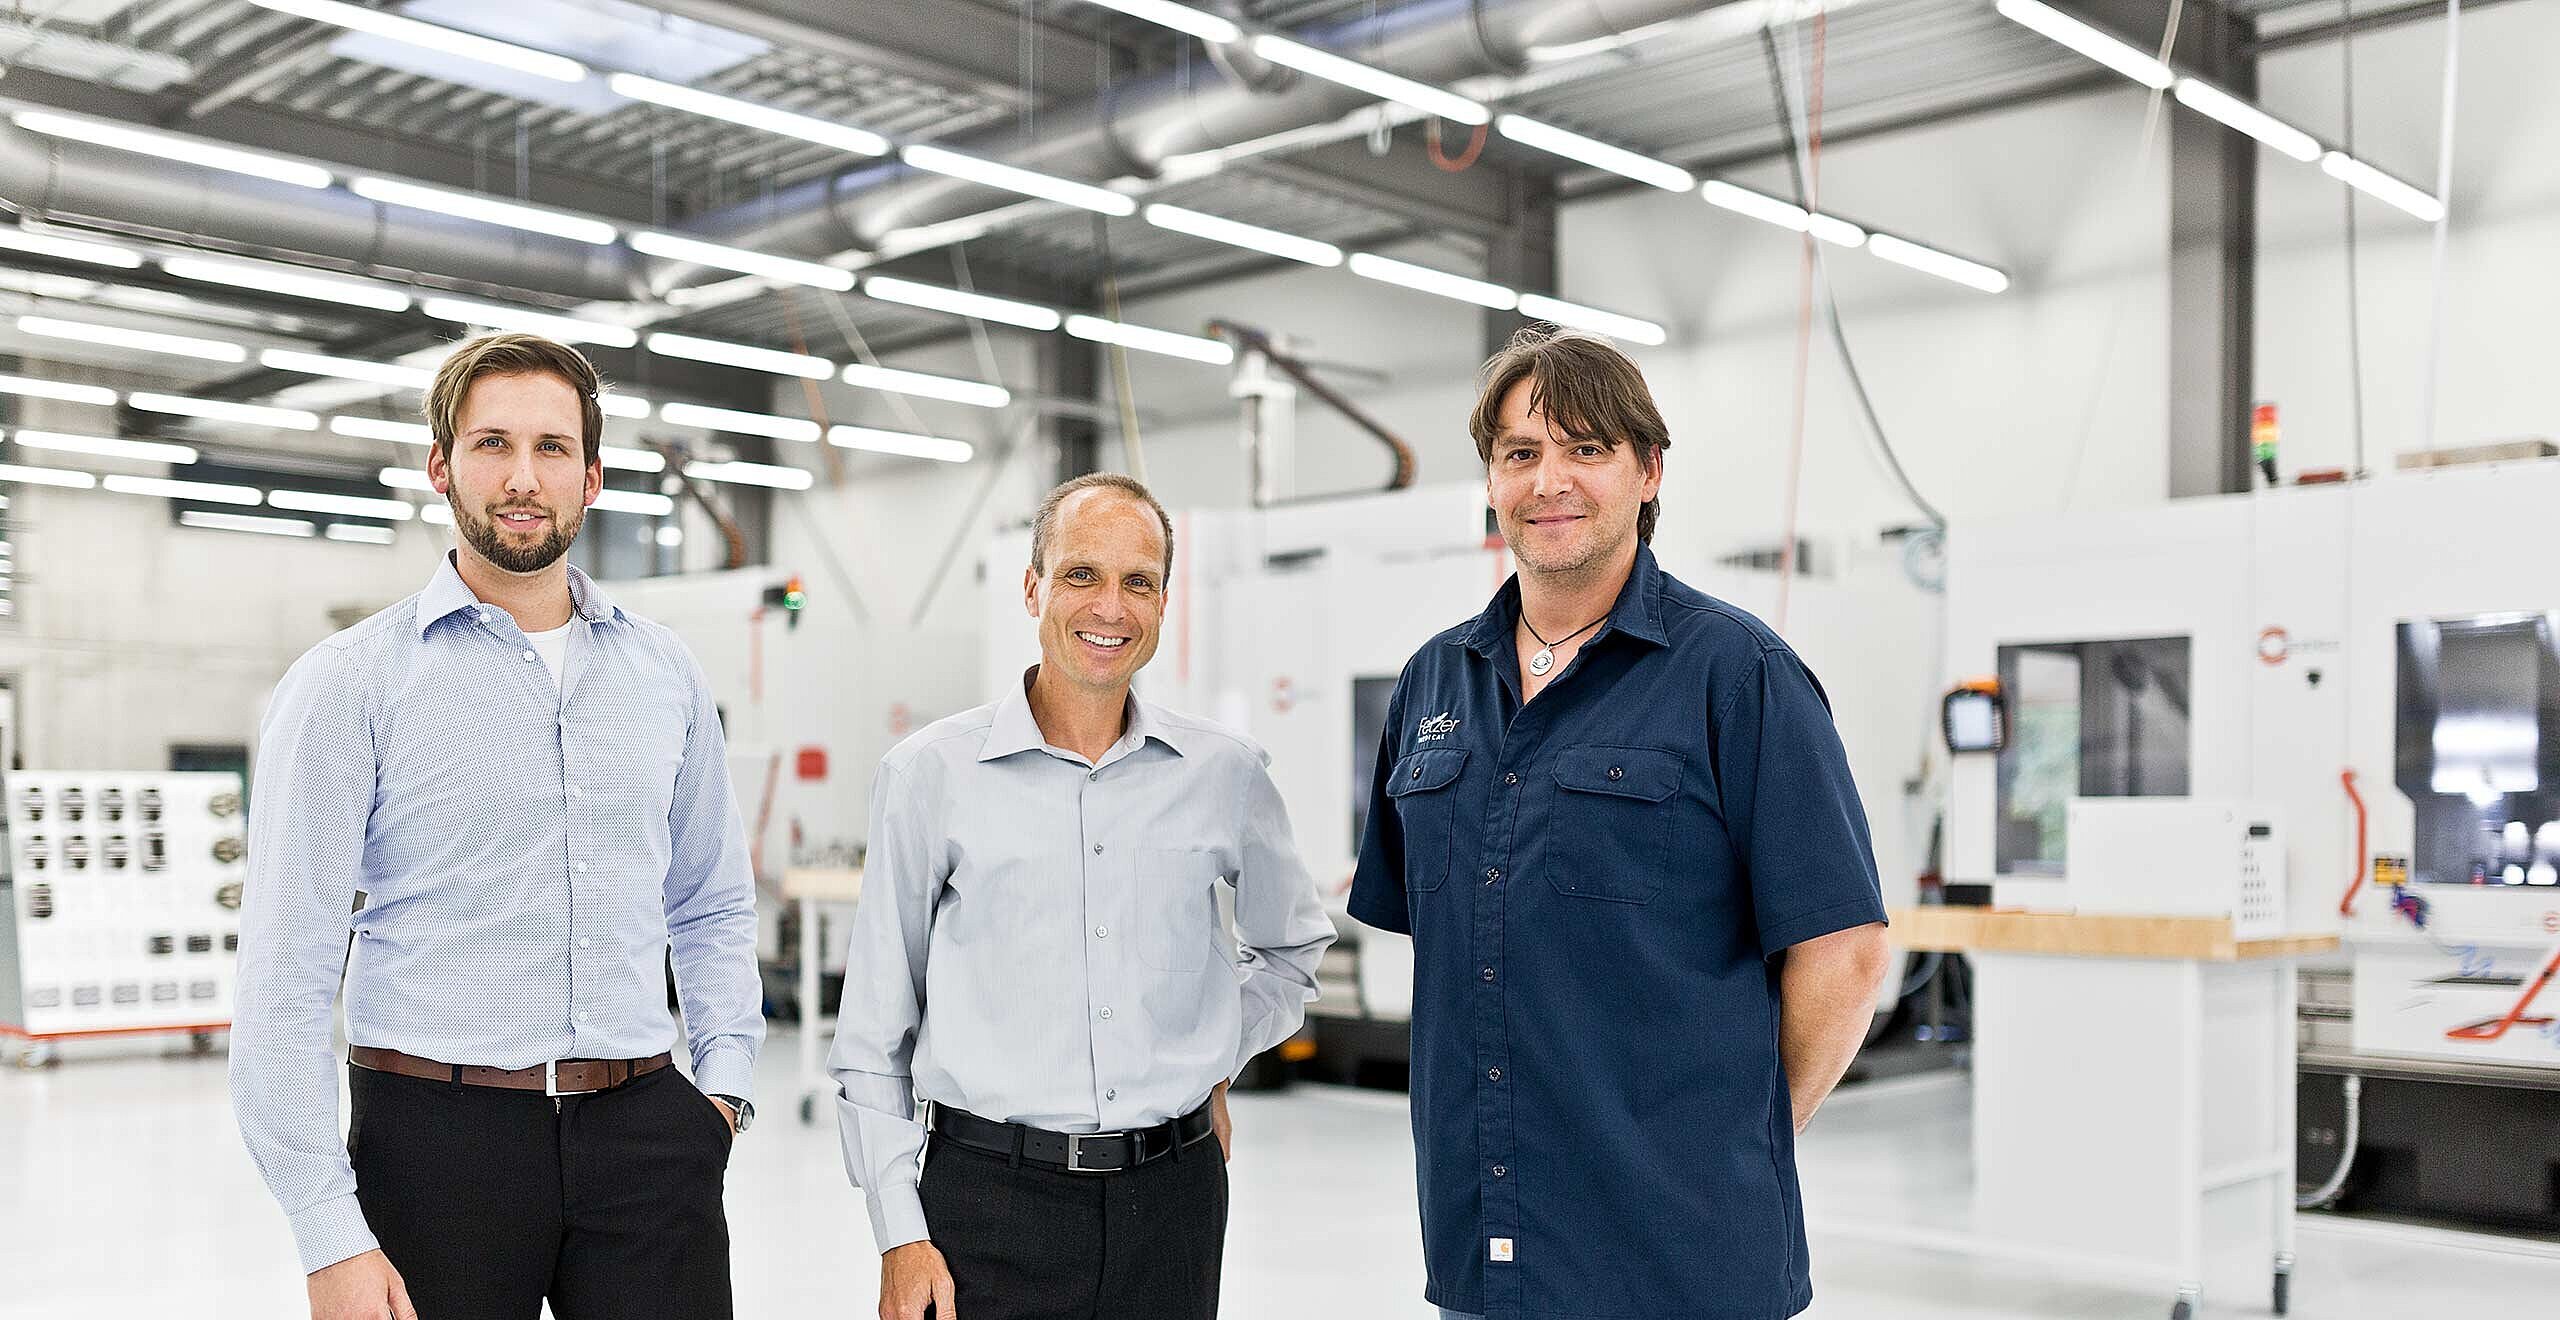 Sascha Riesinger, sales manager, graduate in business administration (FH) Jürgen Stickel, managing director, and Bernd Zepf, production manager, all from Fetzer Medical GmbH & Co. KG in Tuttlingen